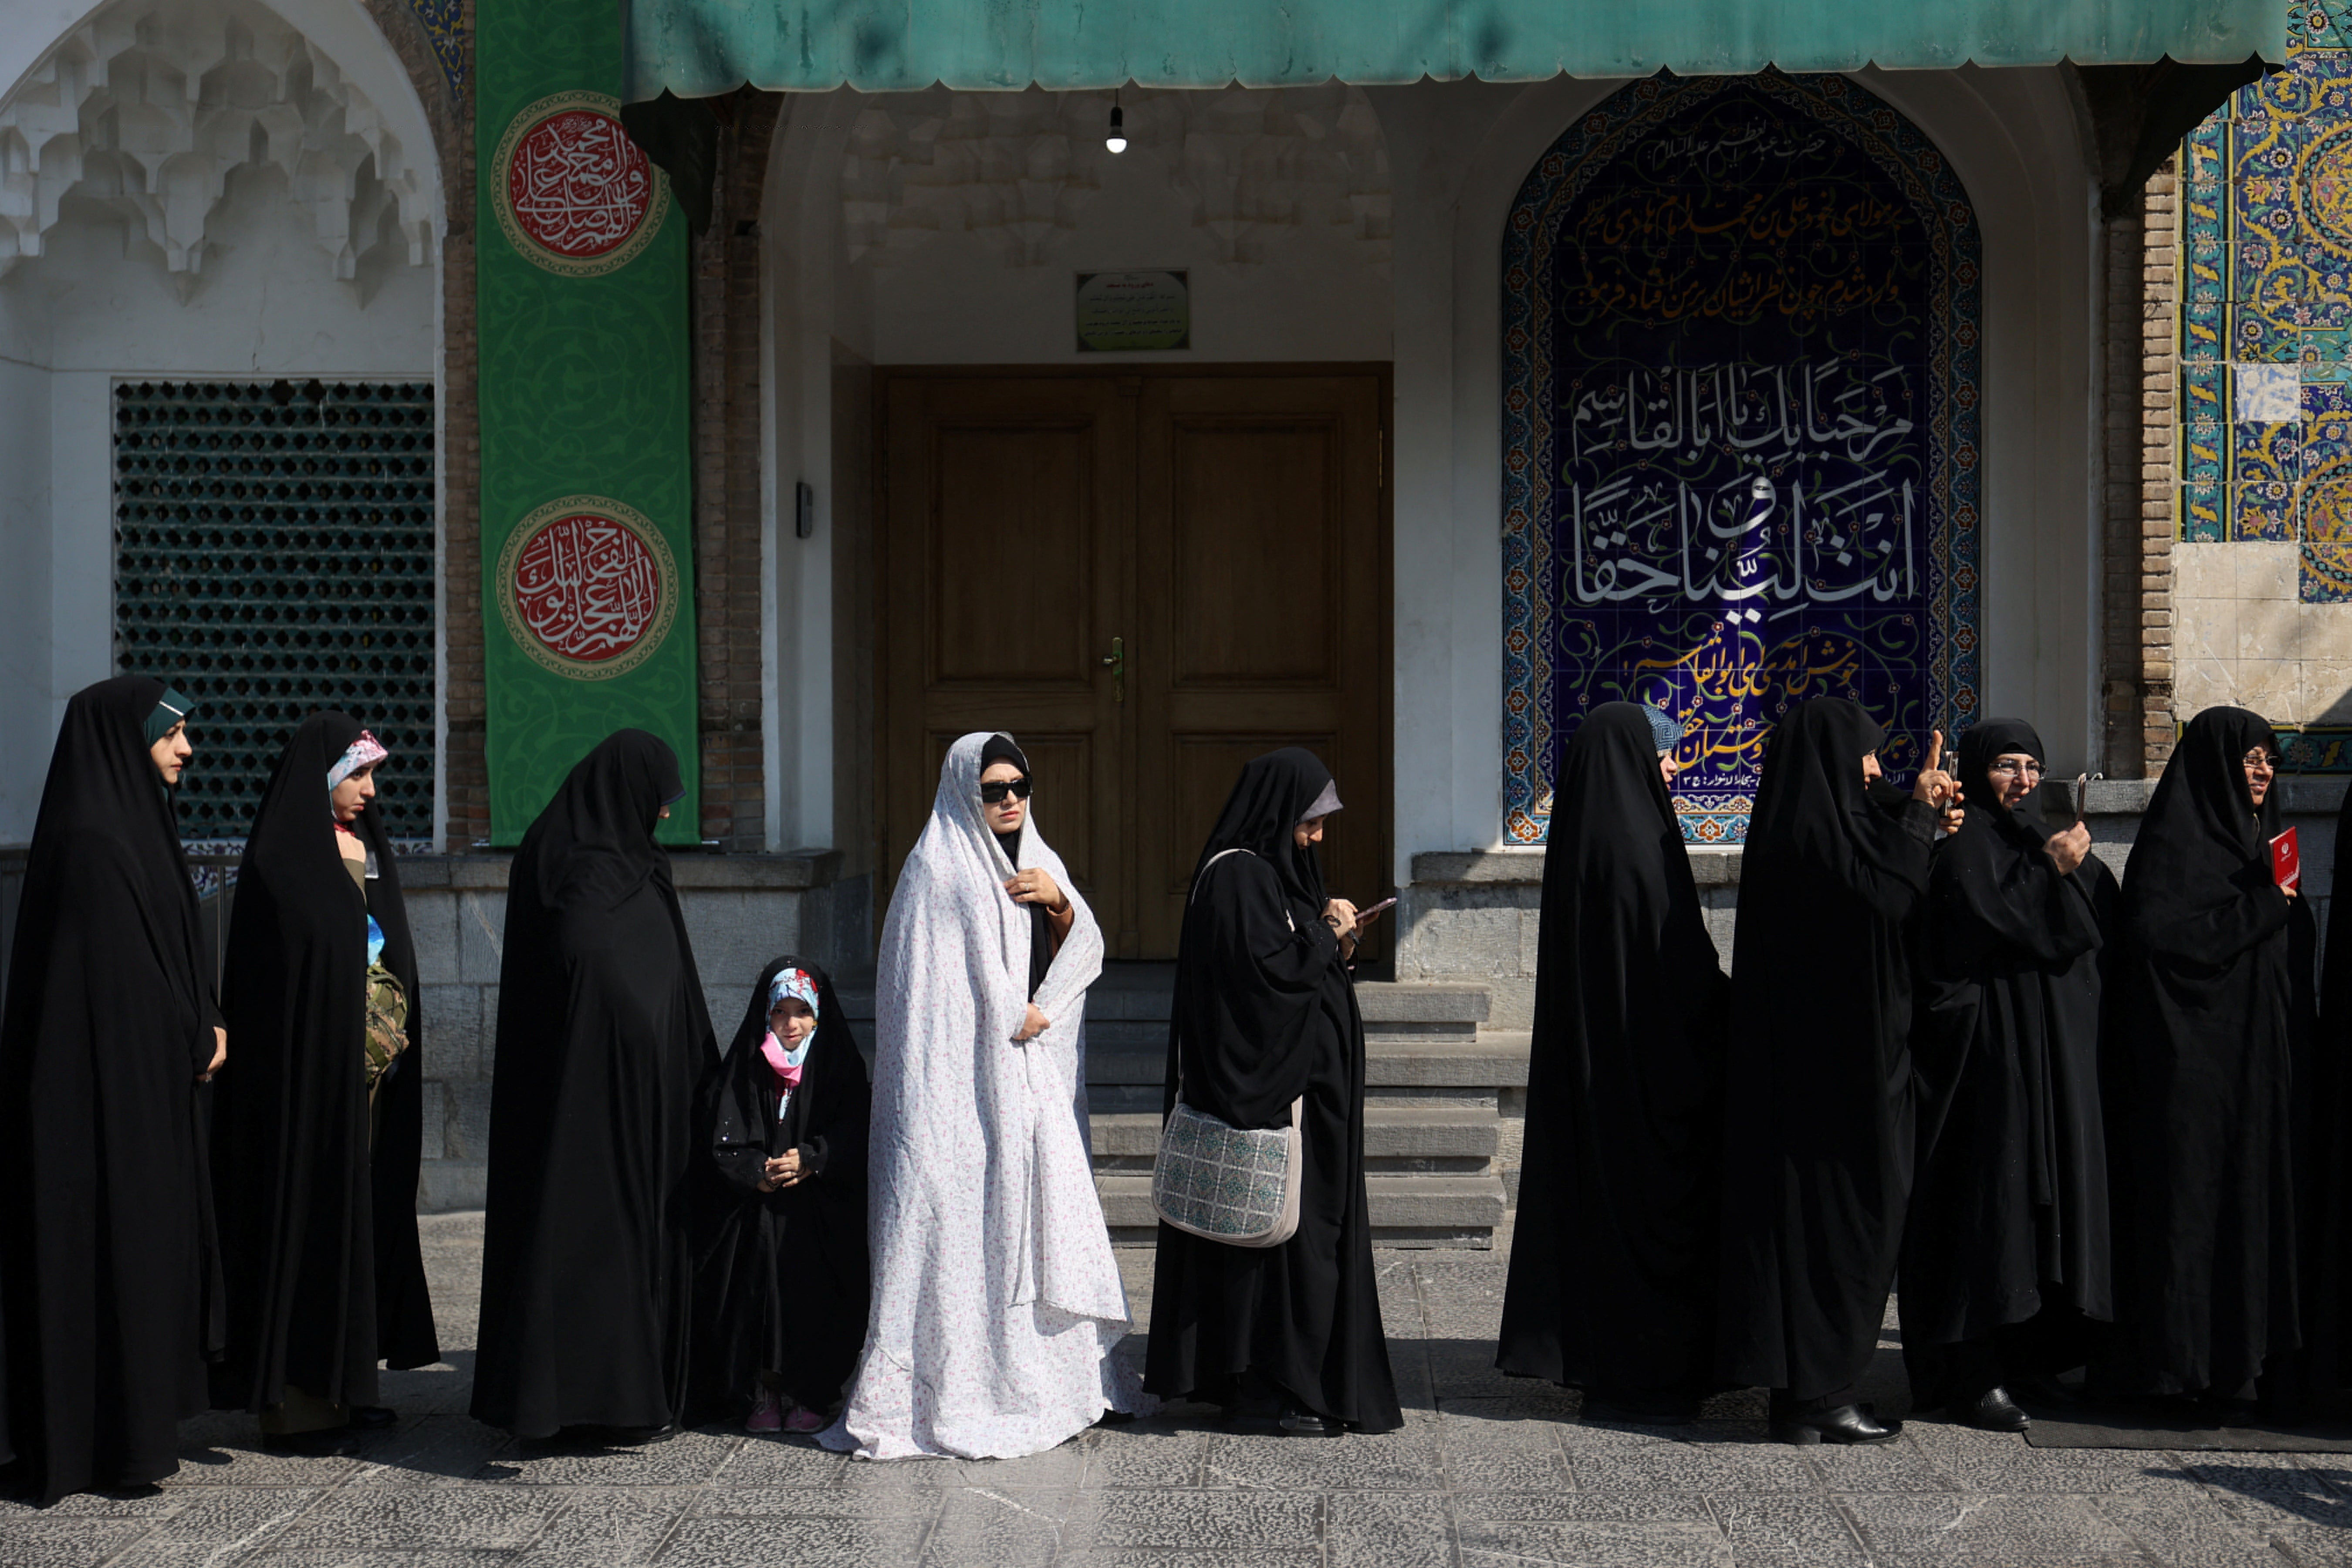 Iranians wait in line to vote at a polling station during parliamentary elections in Tehran